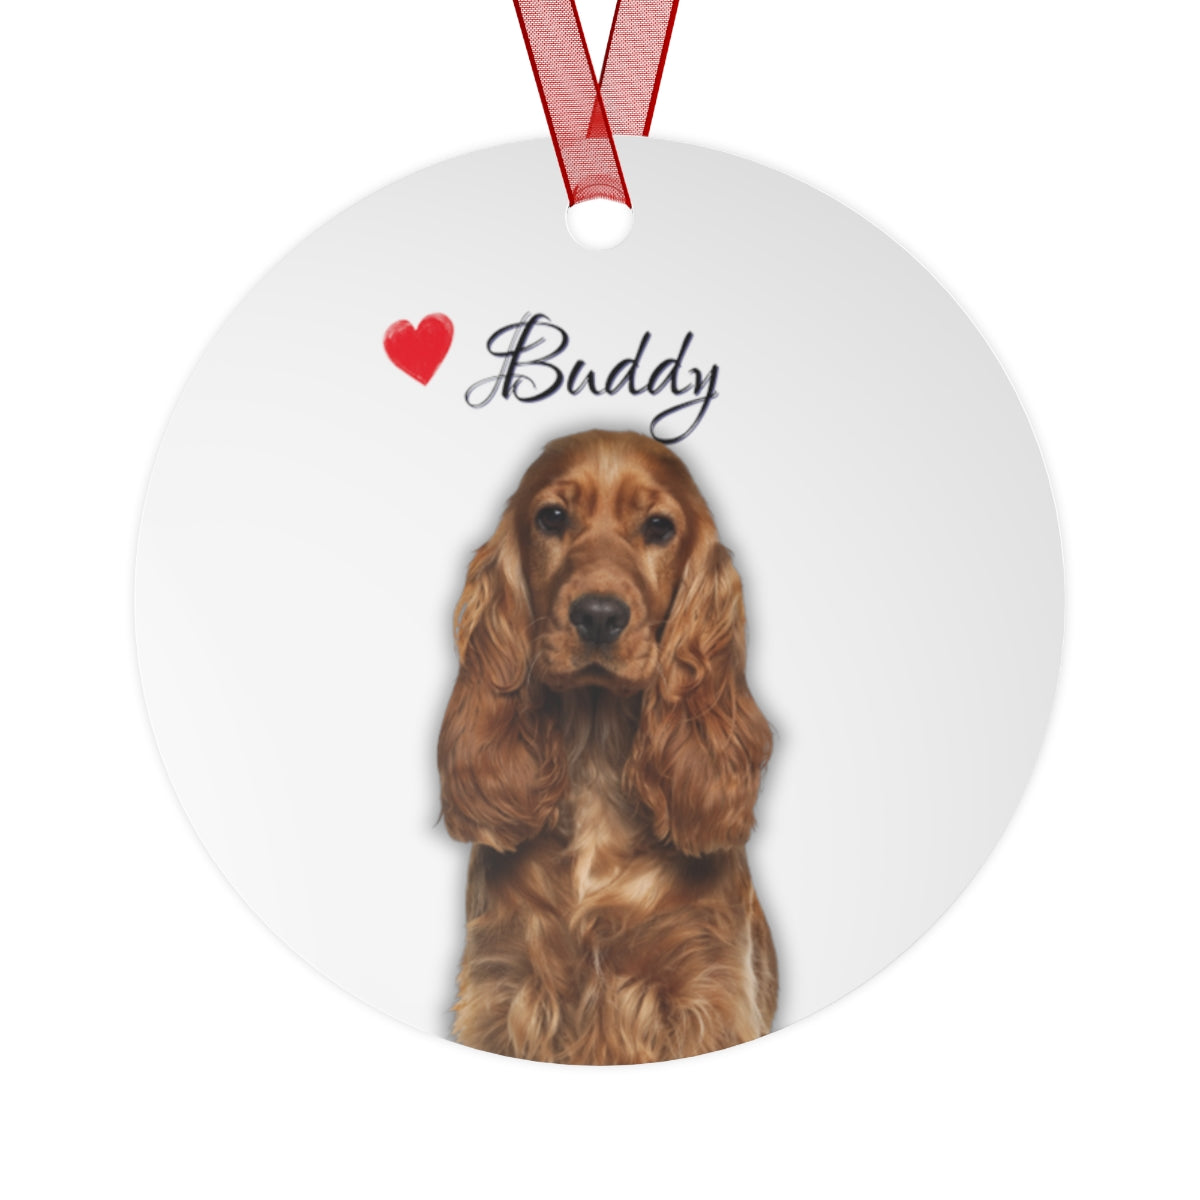 Personalized Pet Ornament with Pet's Photo + Name